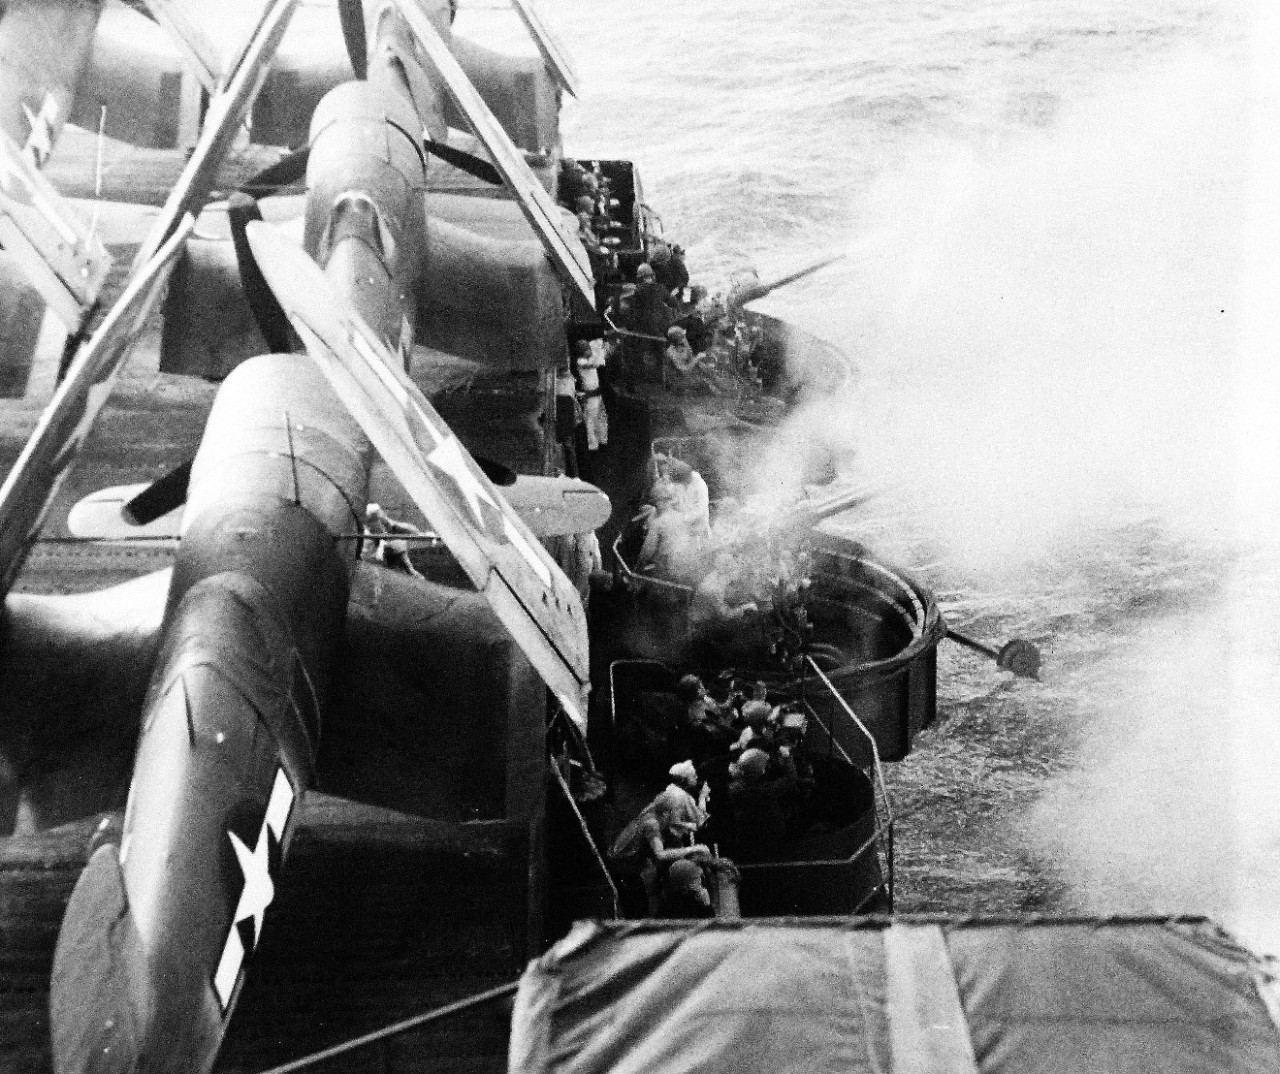 80-G-218364:  Vought F4U Corsair, February 1944.  Starboard battery on board USS Gambier Bay (CVE-73) in action during Marshall Islands Campaign, February 15, 1944.   Note the 40 mm, and the F4U’s with folded wings on flight deck. Official U.S. Navy Photograph, now in the collections of the National Archives.  